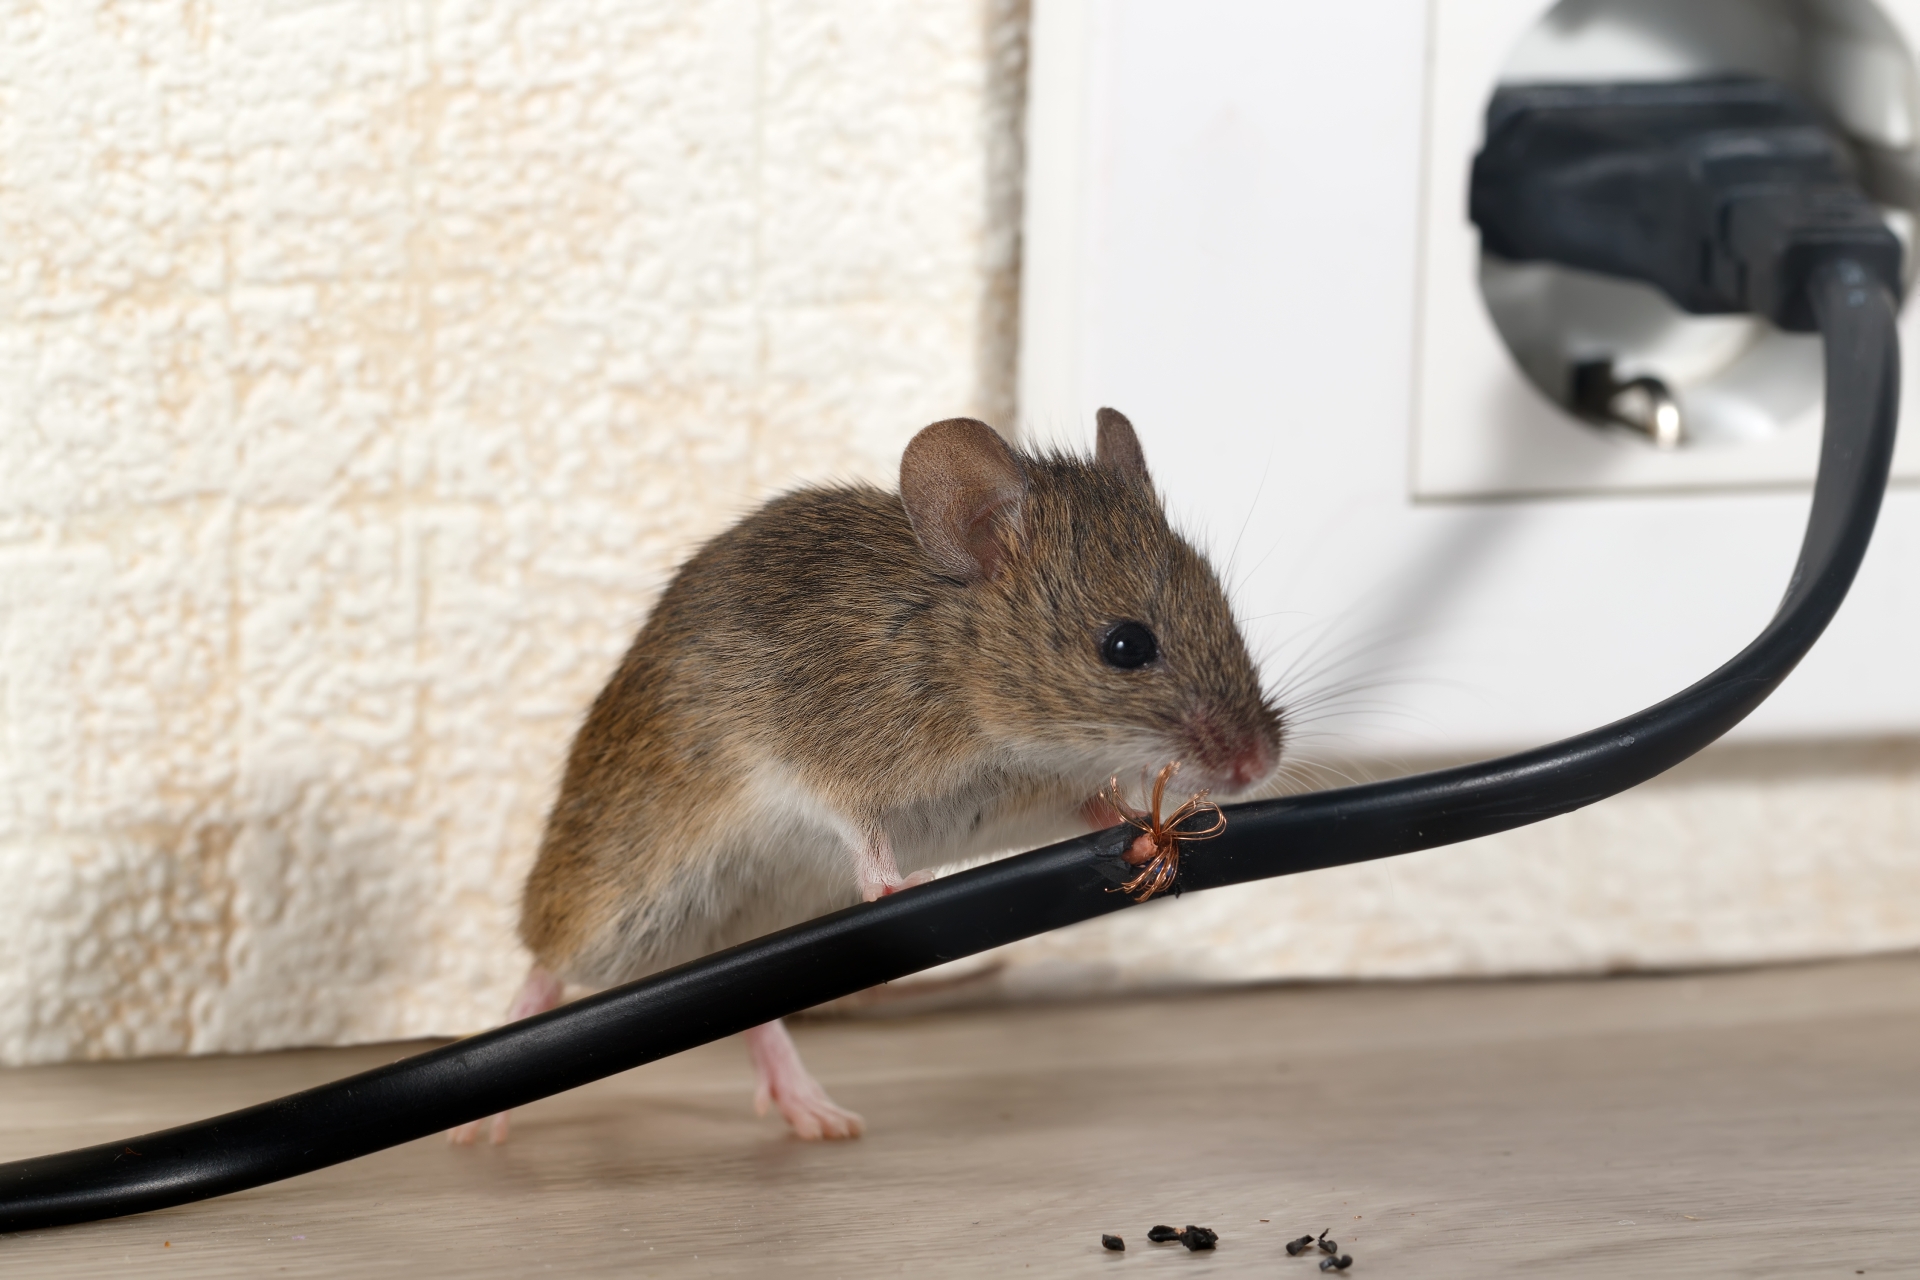 Mice Infestation, Pest Control in Norwood Green, UB2. Call Now 020 8166 9746